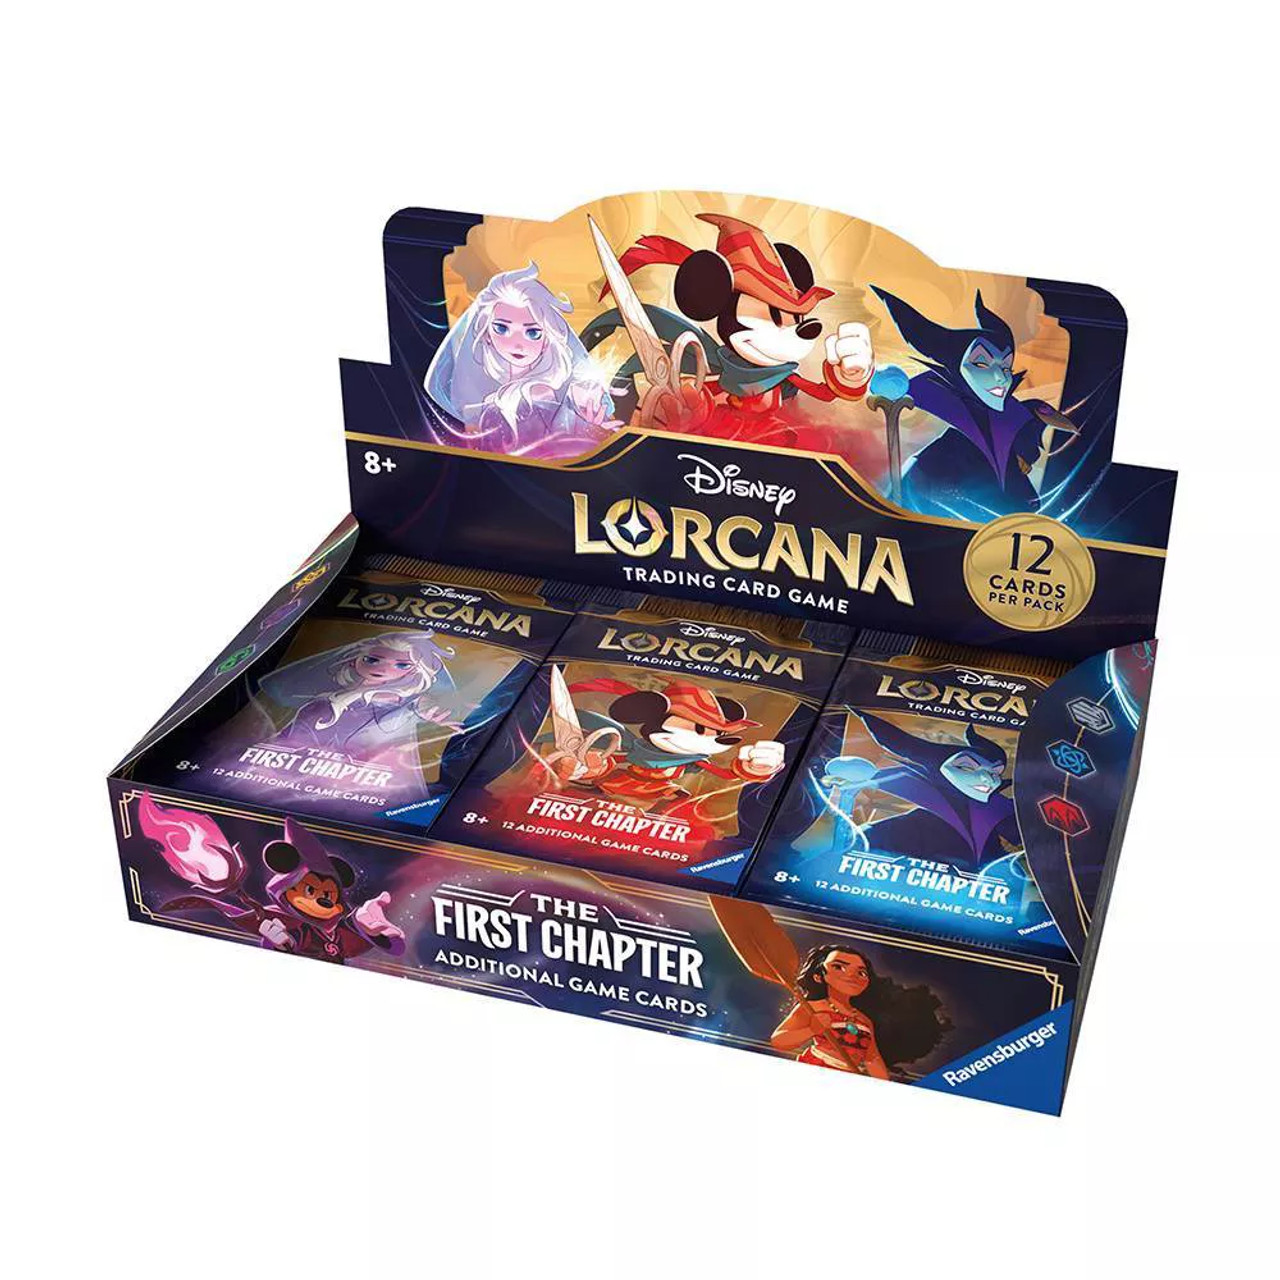 DISNEY LORCANA The First Chapter Deck Boxes & Sleeves Full Set of 3